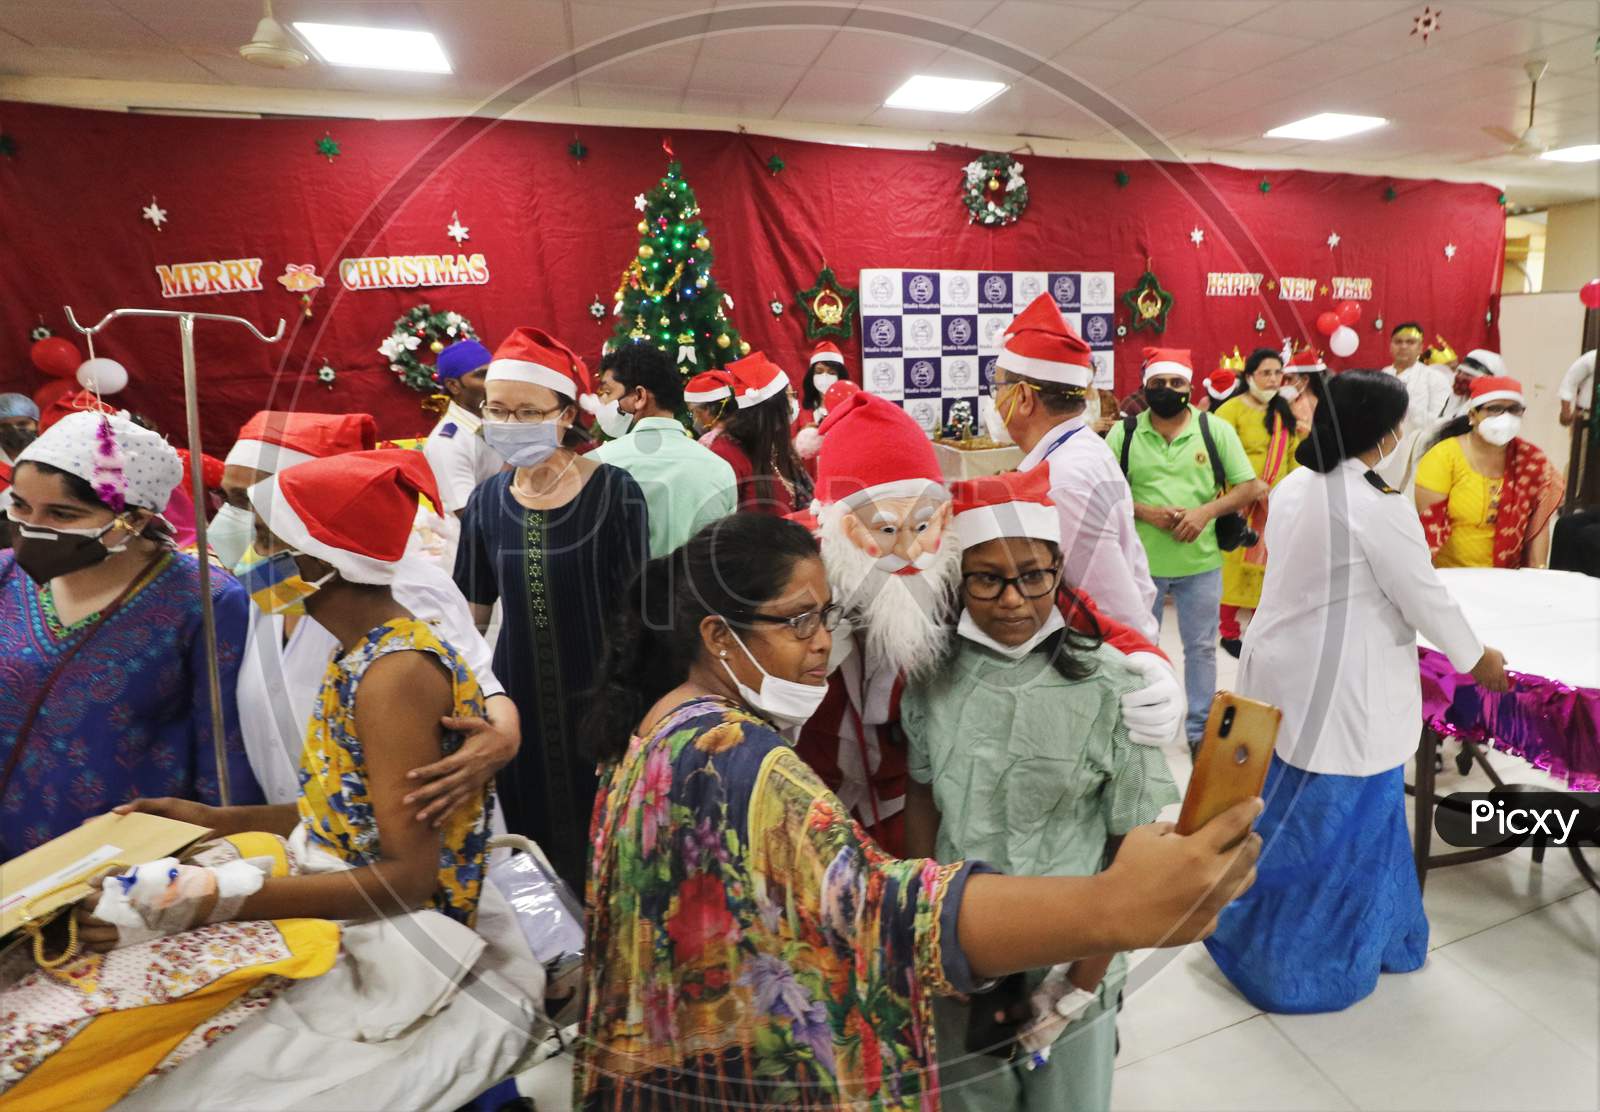 Parents of the patients take pictures with the man dressed as Santa Claus entertains patients during Christmas celebration, at  Wadia Hospital For Children in Mumbai, India on December, 2020.